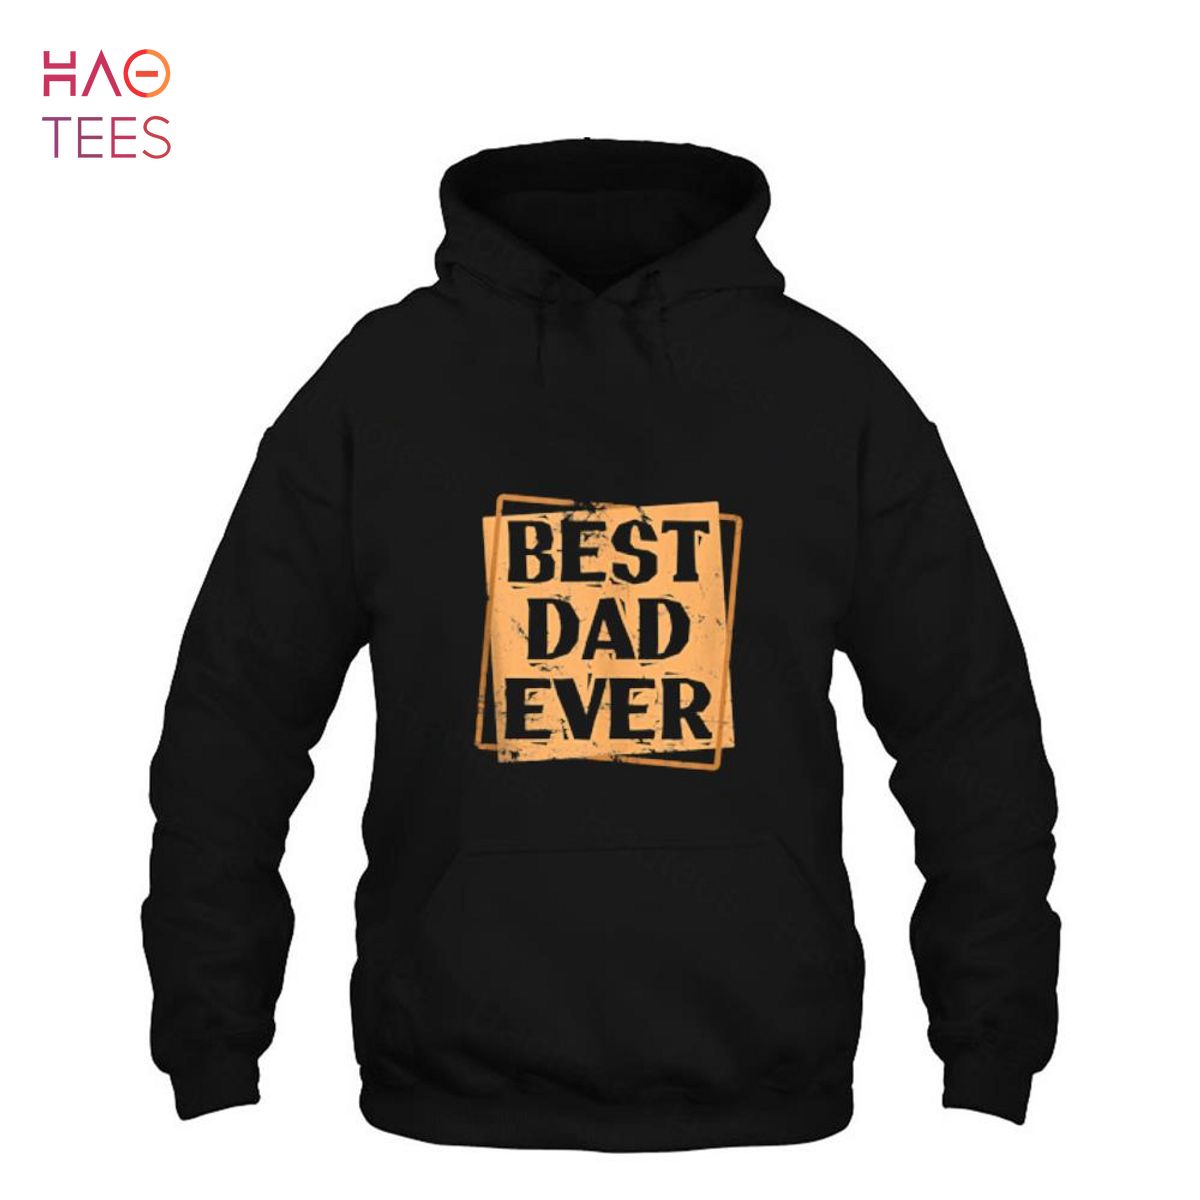 Best Dad ever Dad Father's Day Holiday Shirt